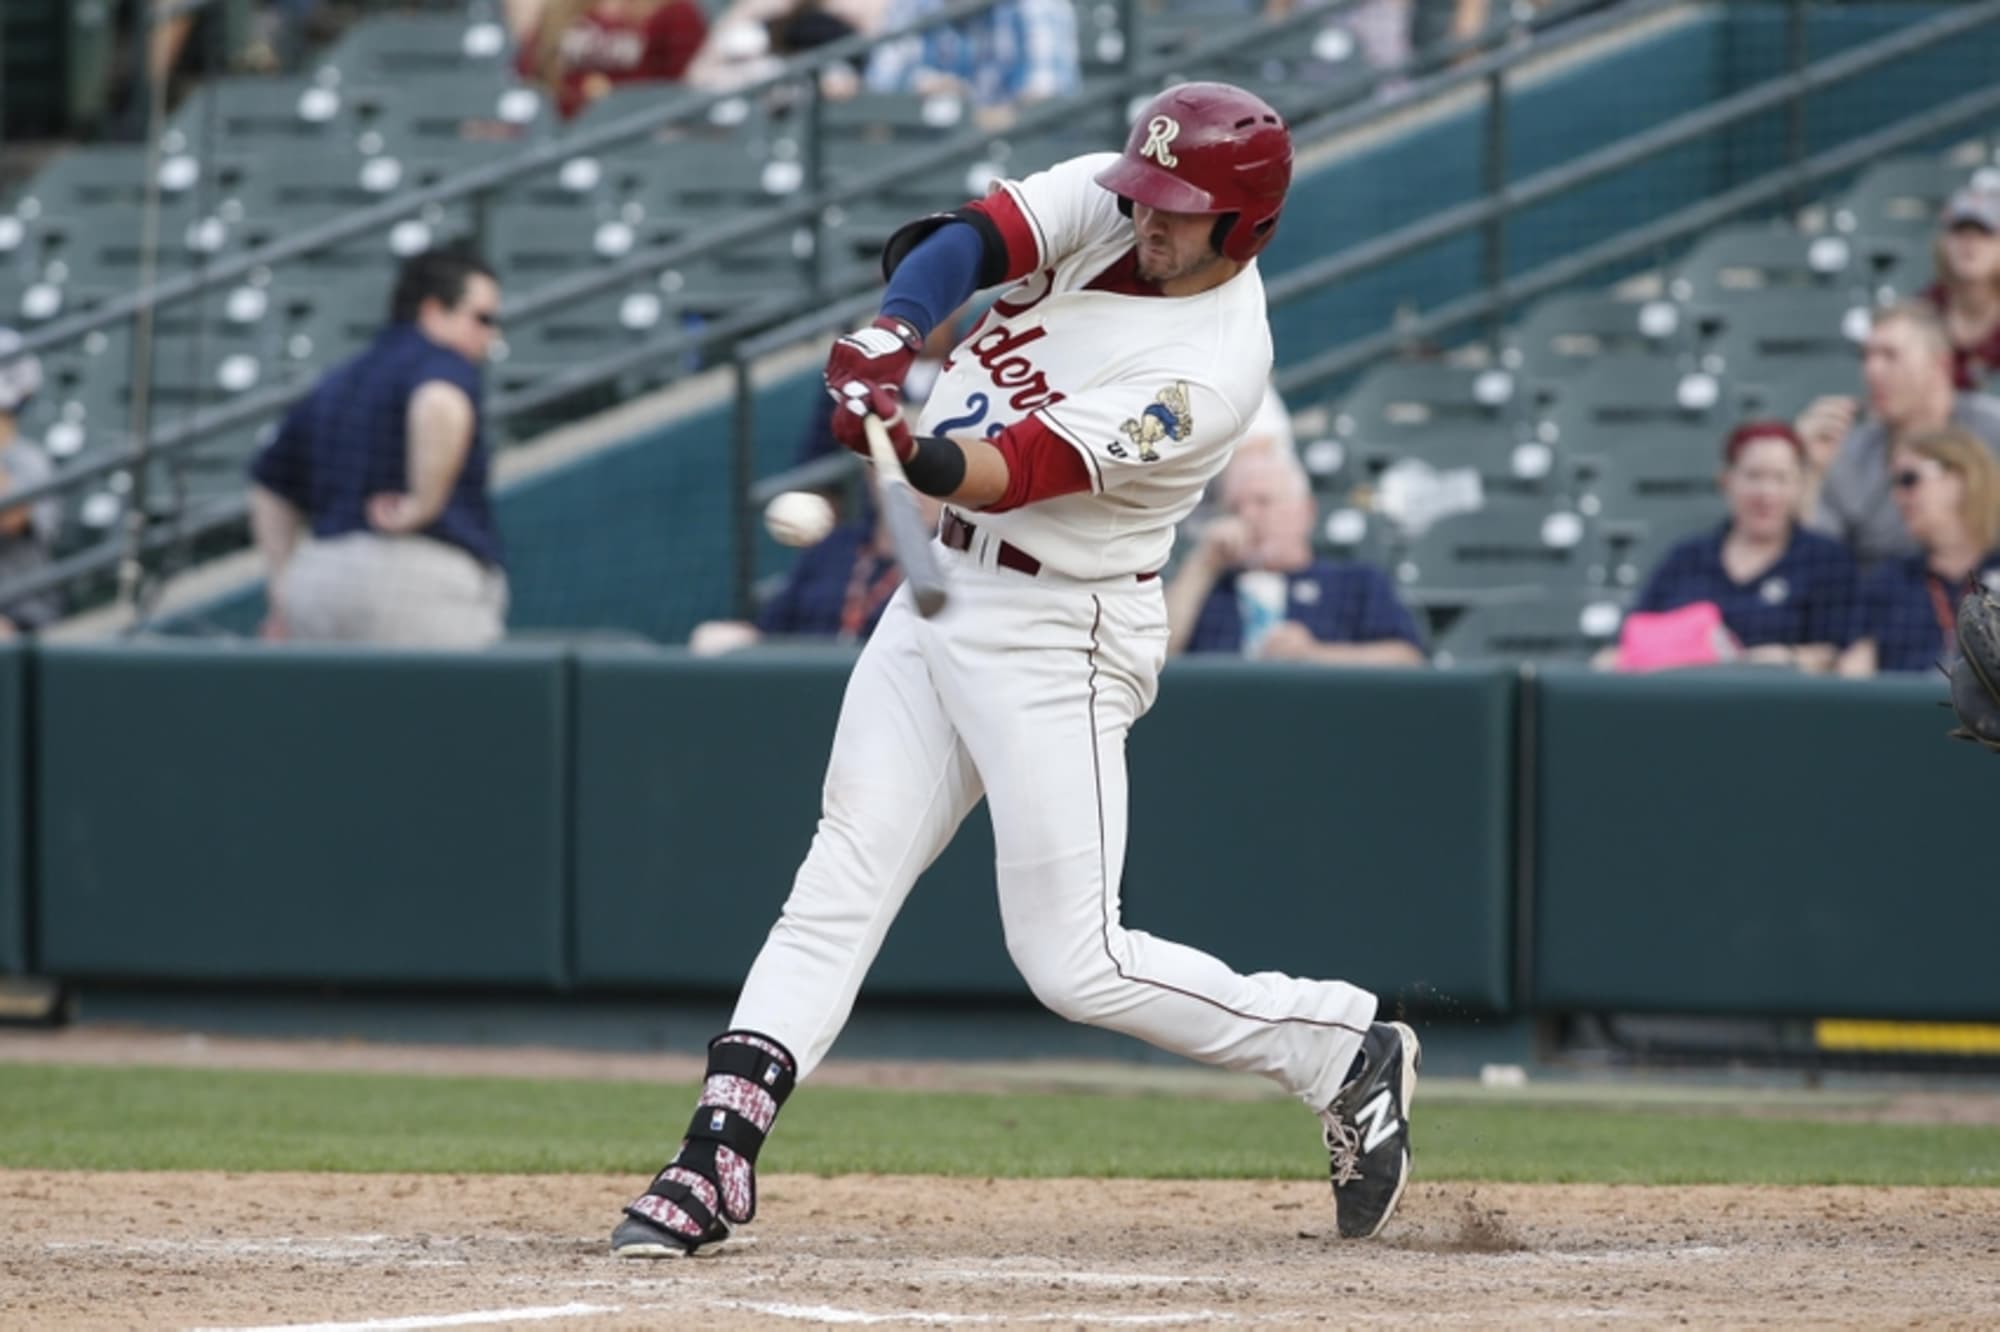 Frisco Roughriders Off To Hot Start